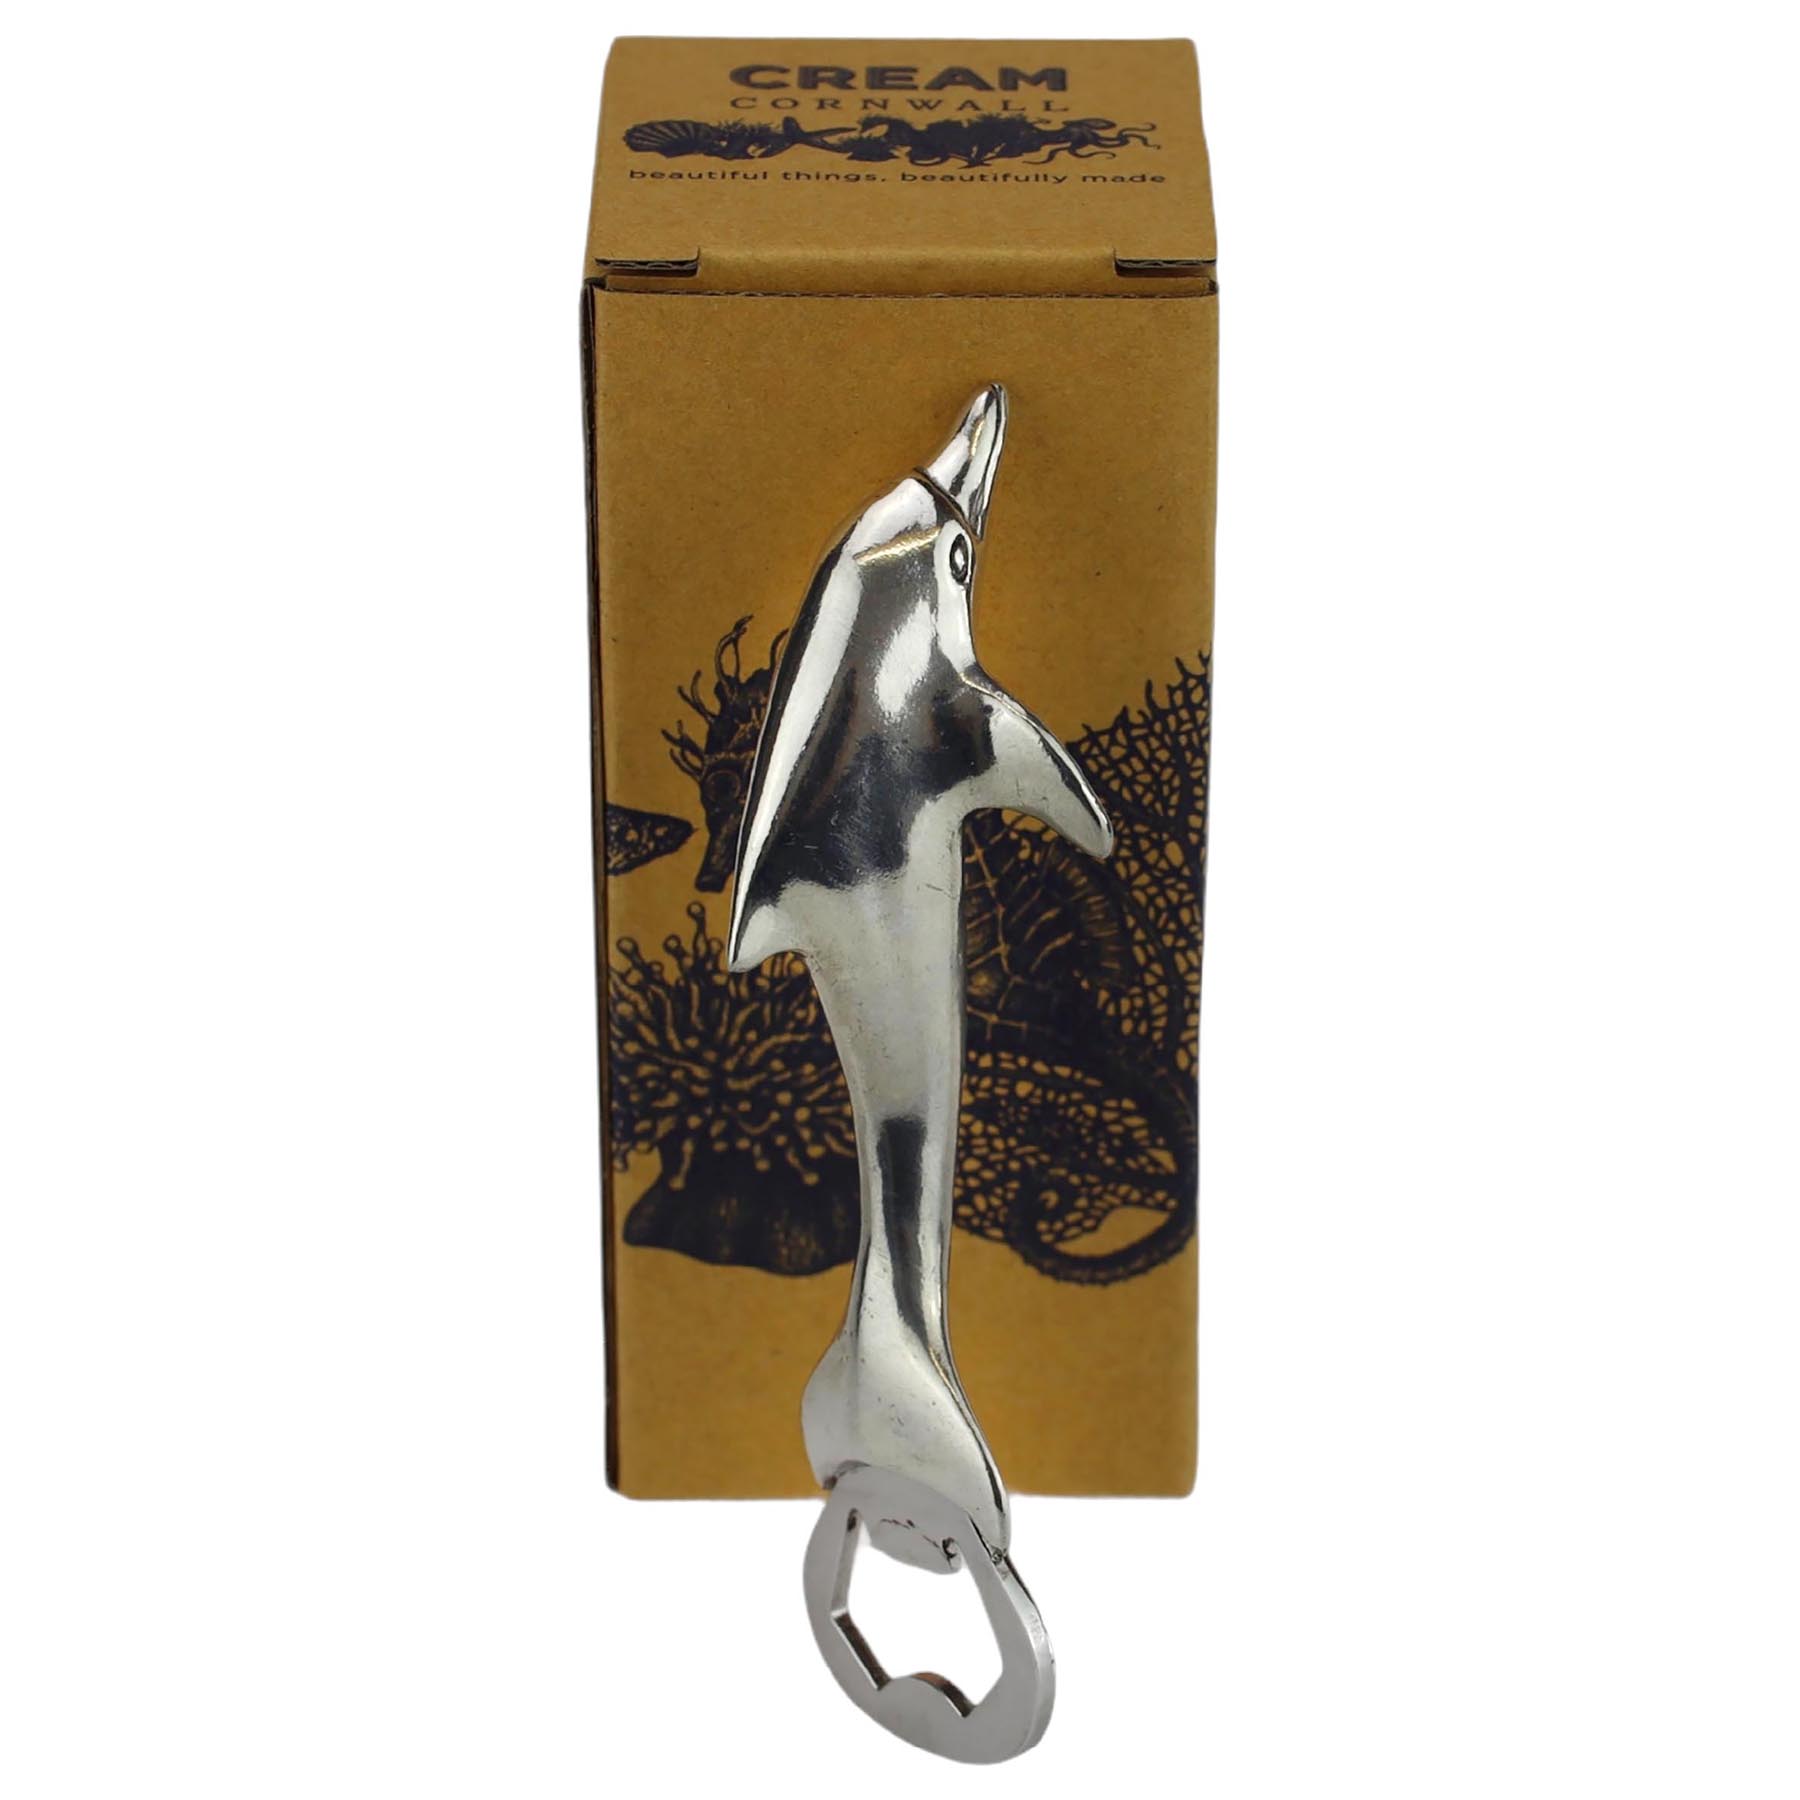 Pewter Dolphin Bottle Opener  on its side in front of a cream cornwall box